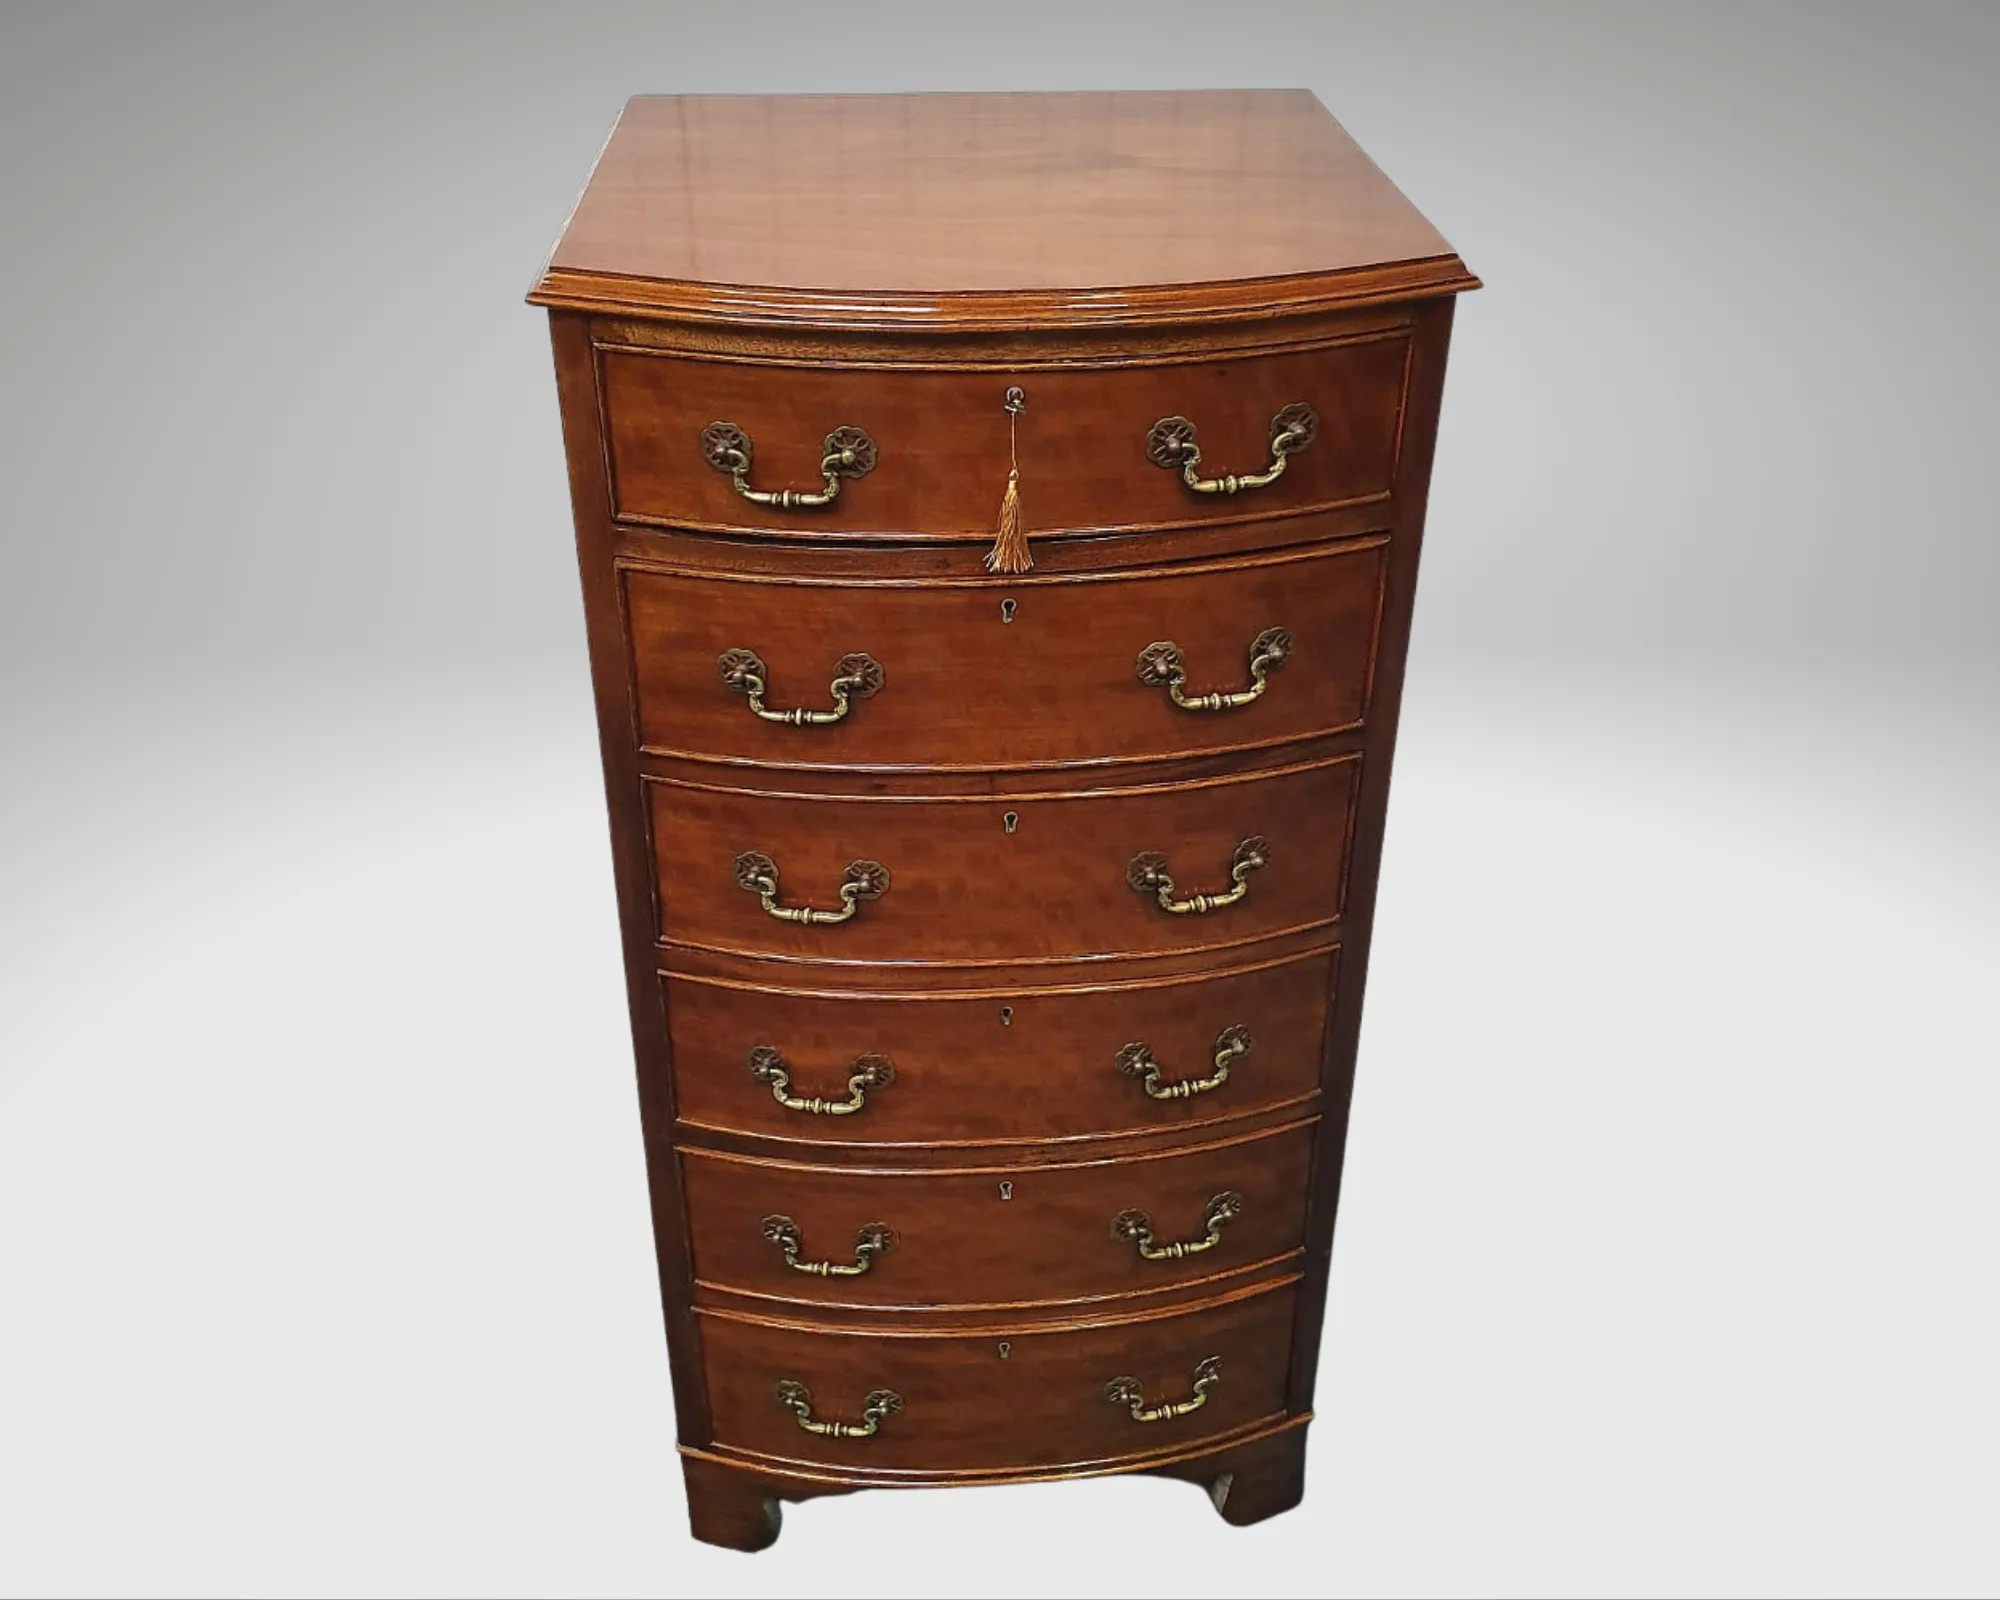  Early 20th Century Mahogany Chest of Drawers